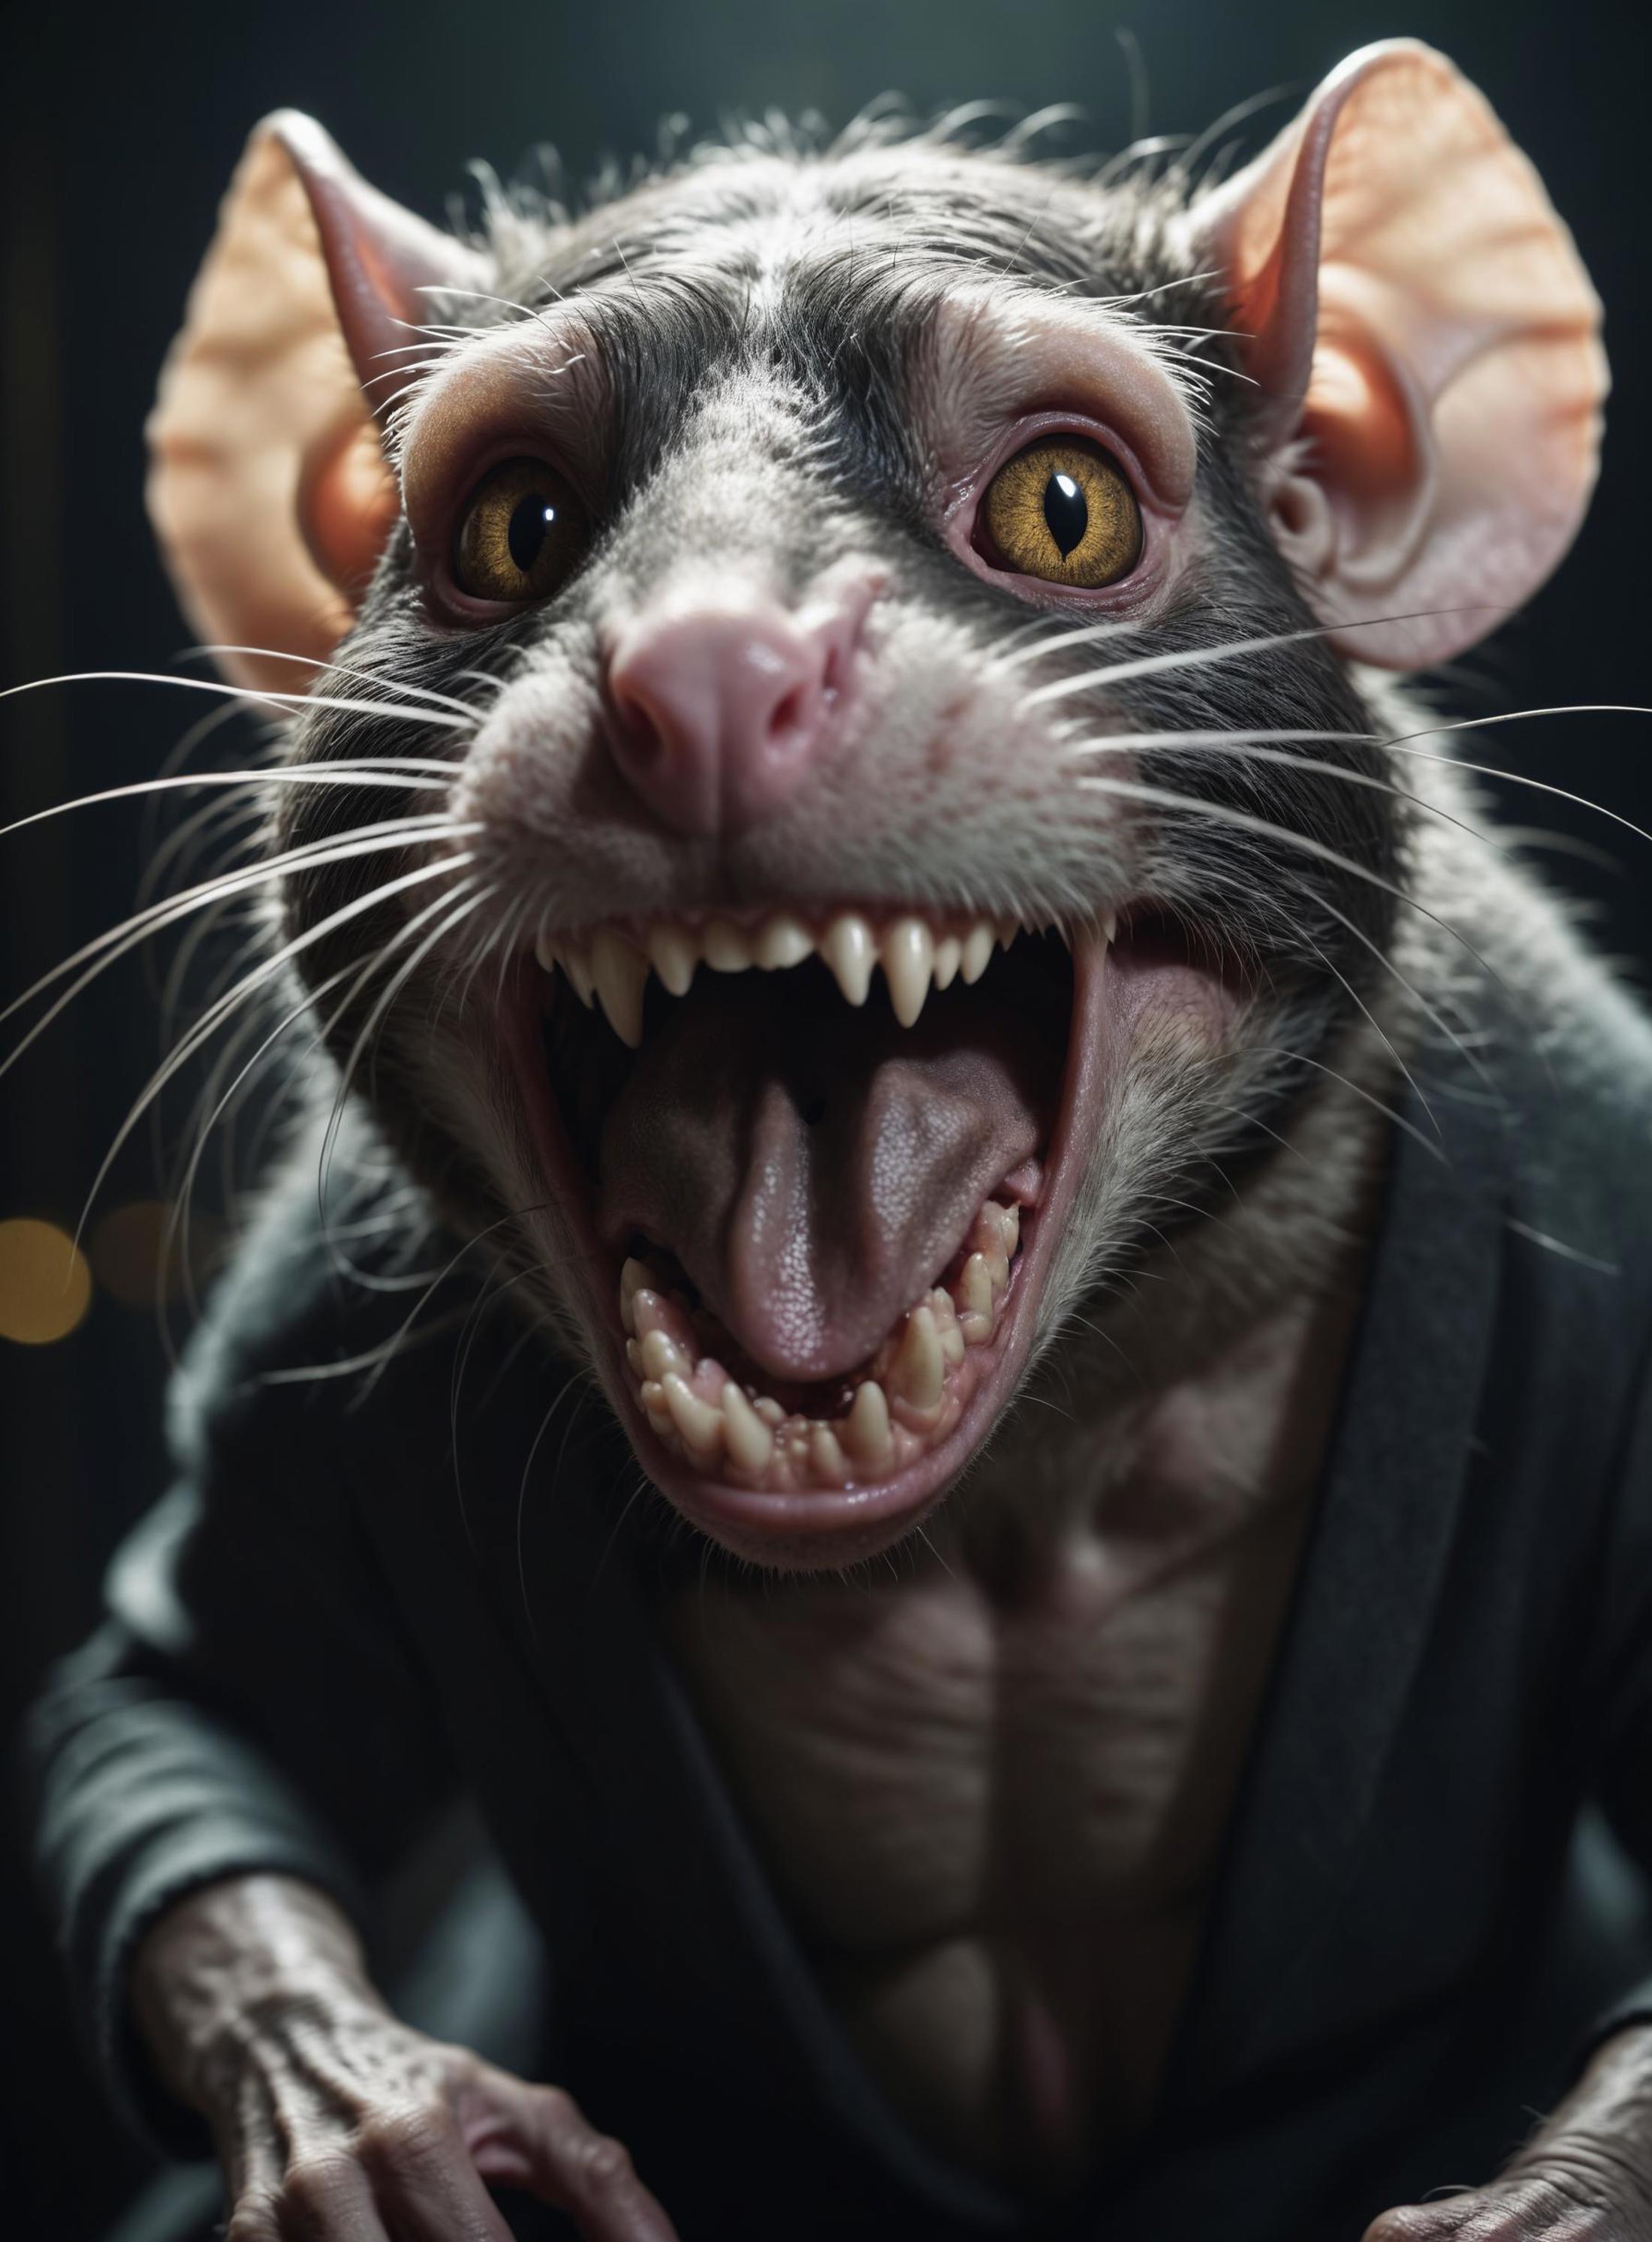 A menacing rat with large teeth and big ears wearing a black shirt.